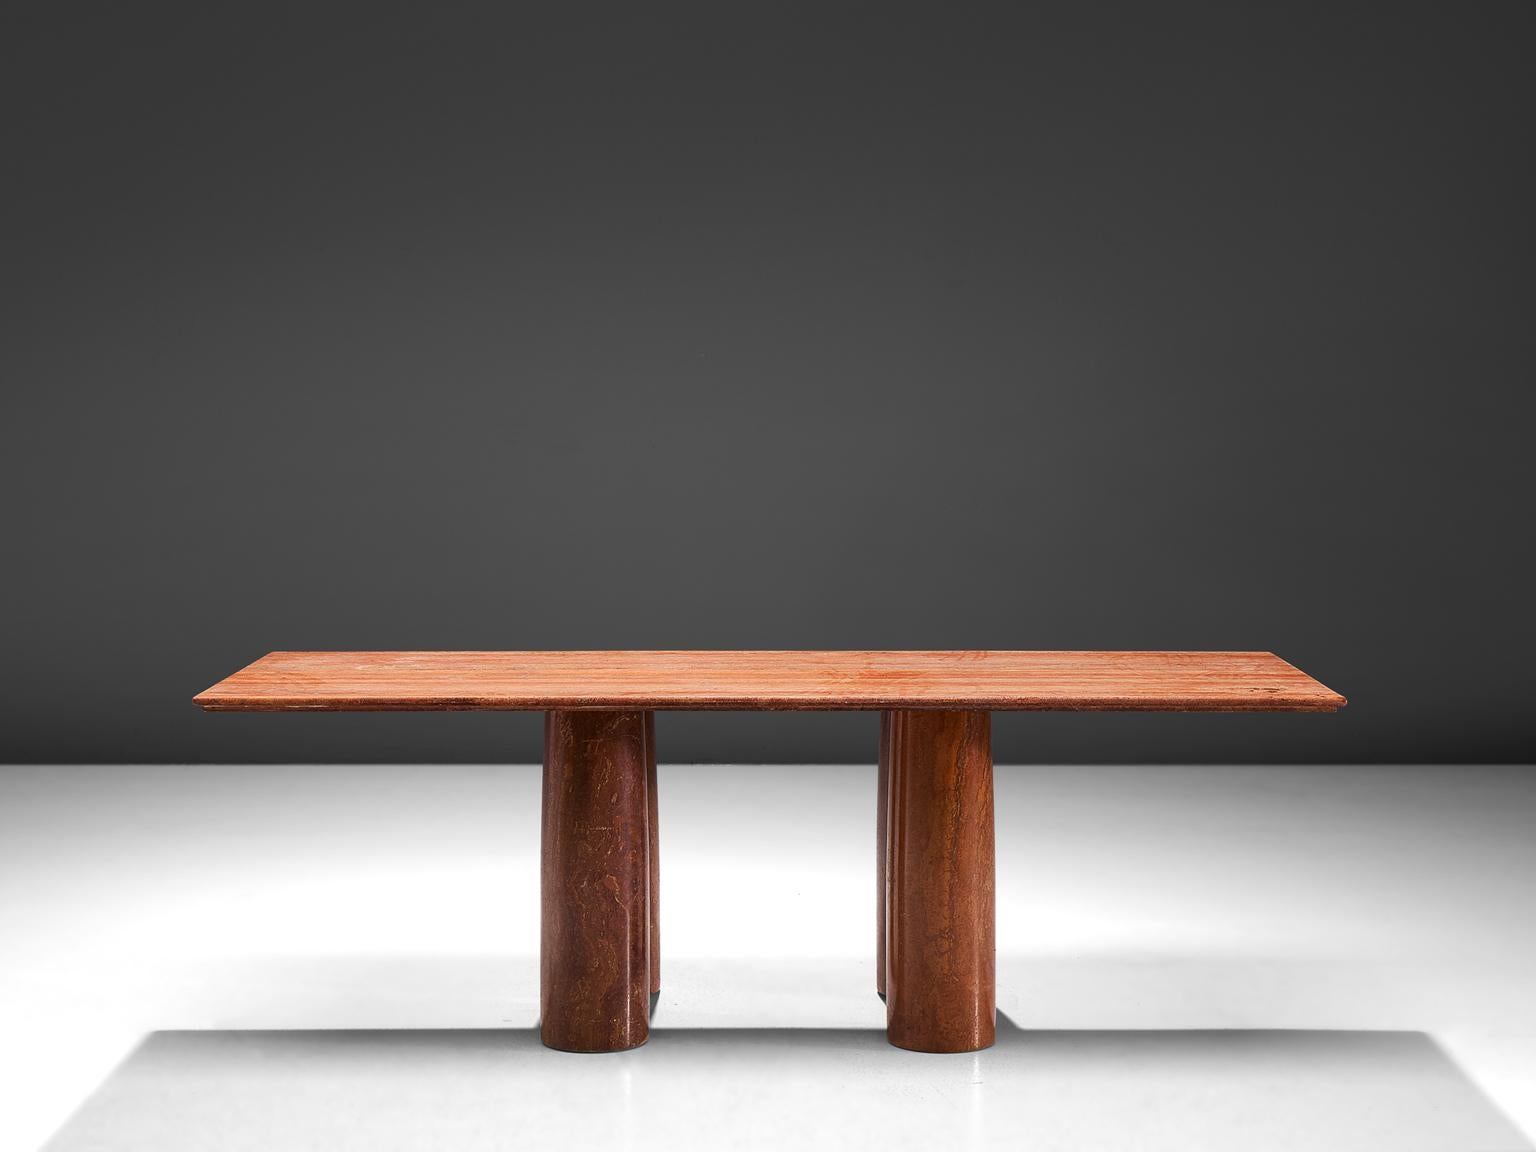 Mario Bellini 'Il Colonato' table, red travertine, Italy, 1970s

This 'Il Colonnato' dining table was designed by Italian designer Mario Bellini. For this series of tables, Bellini was inspired by ancient Roman columns. This table consist of four